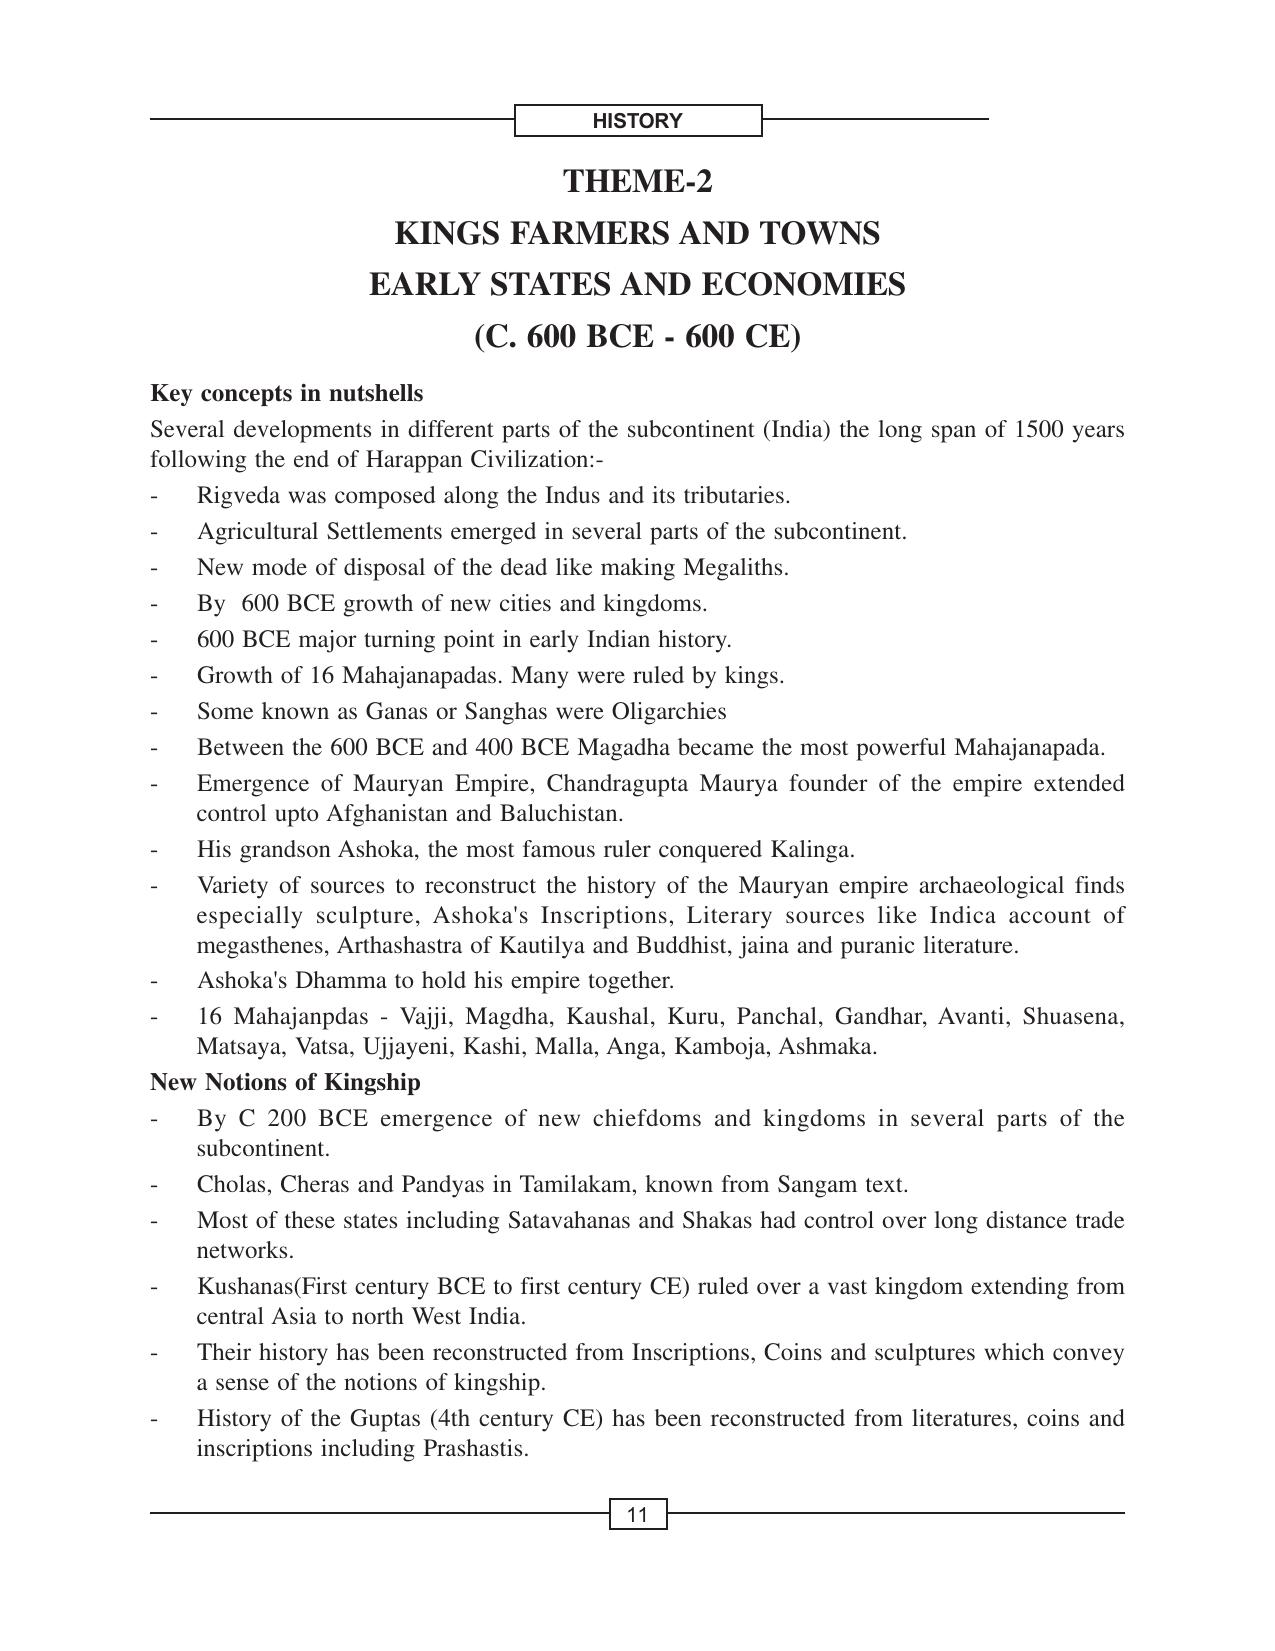 CBSE Class 12 History Kings Farmers Towns Early States Economies - Page 1